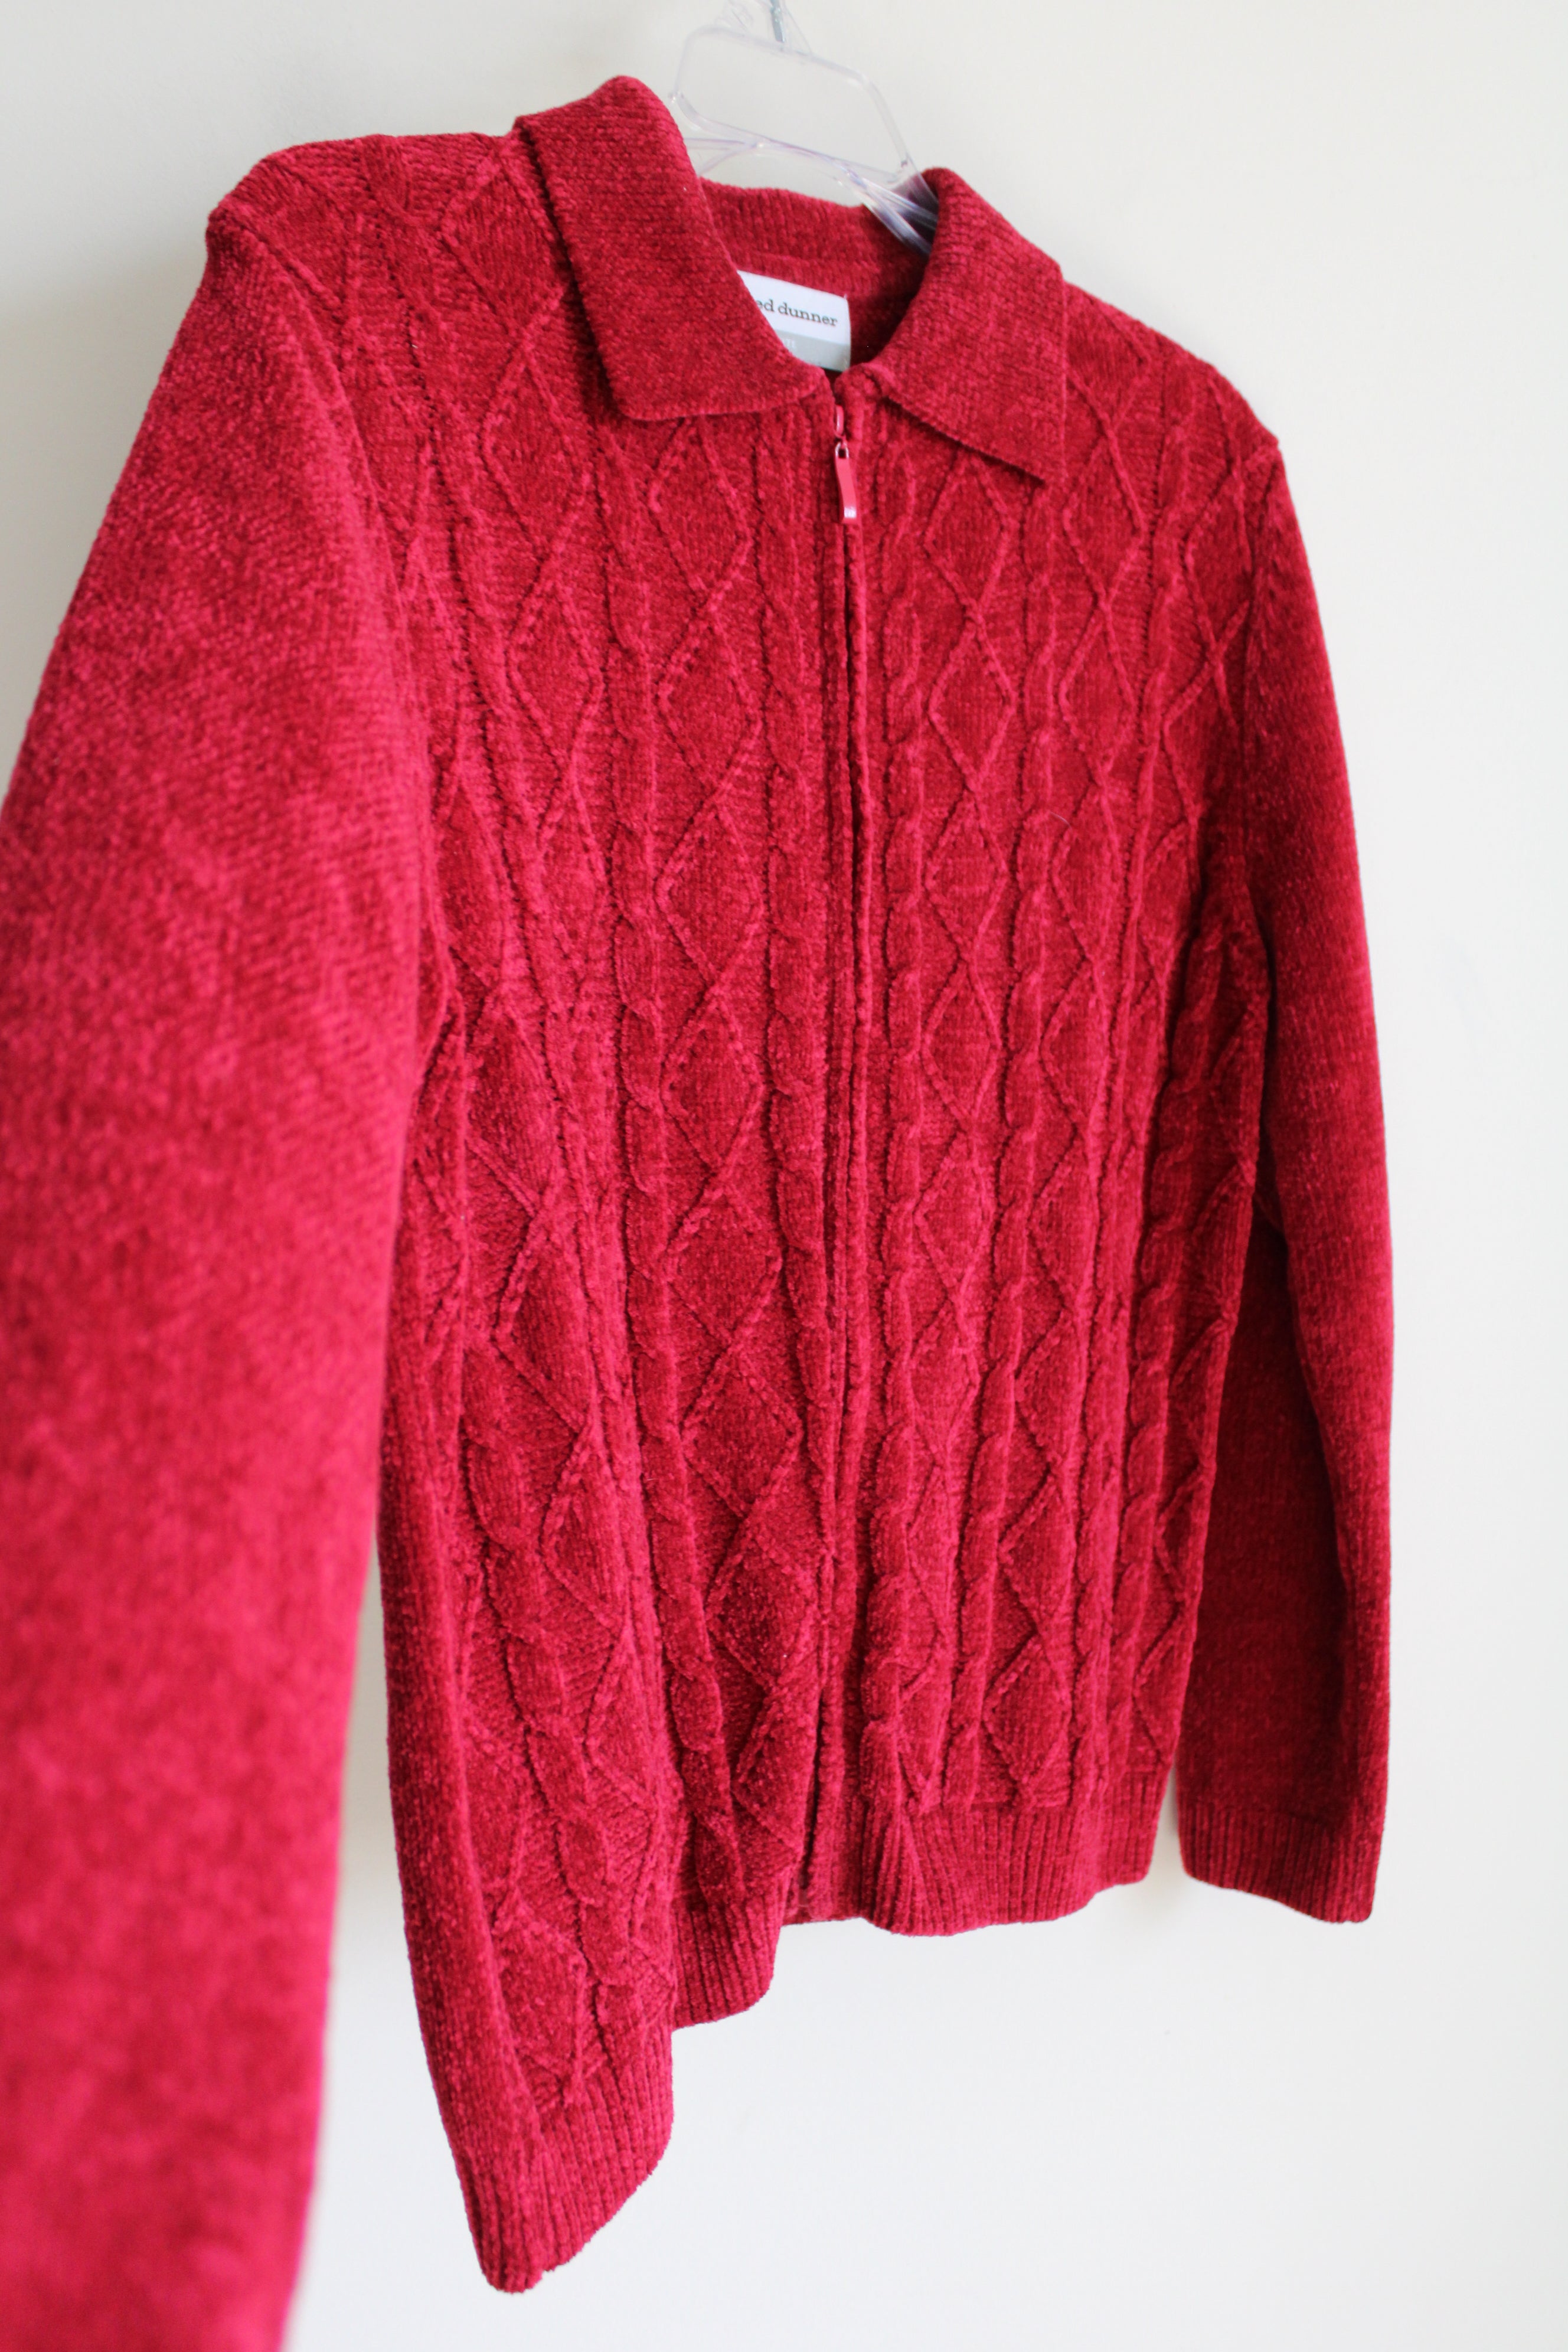 Alfred Dinner Red Chenille Zip Up Sweater